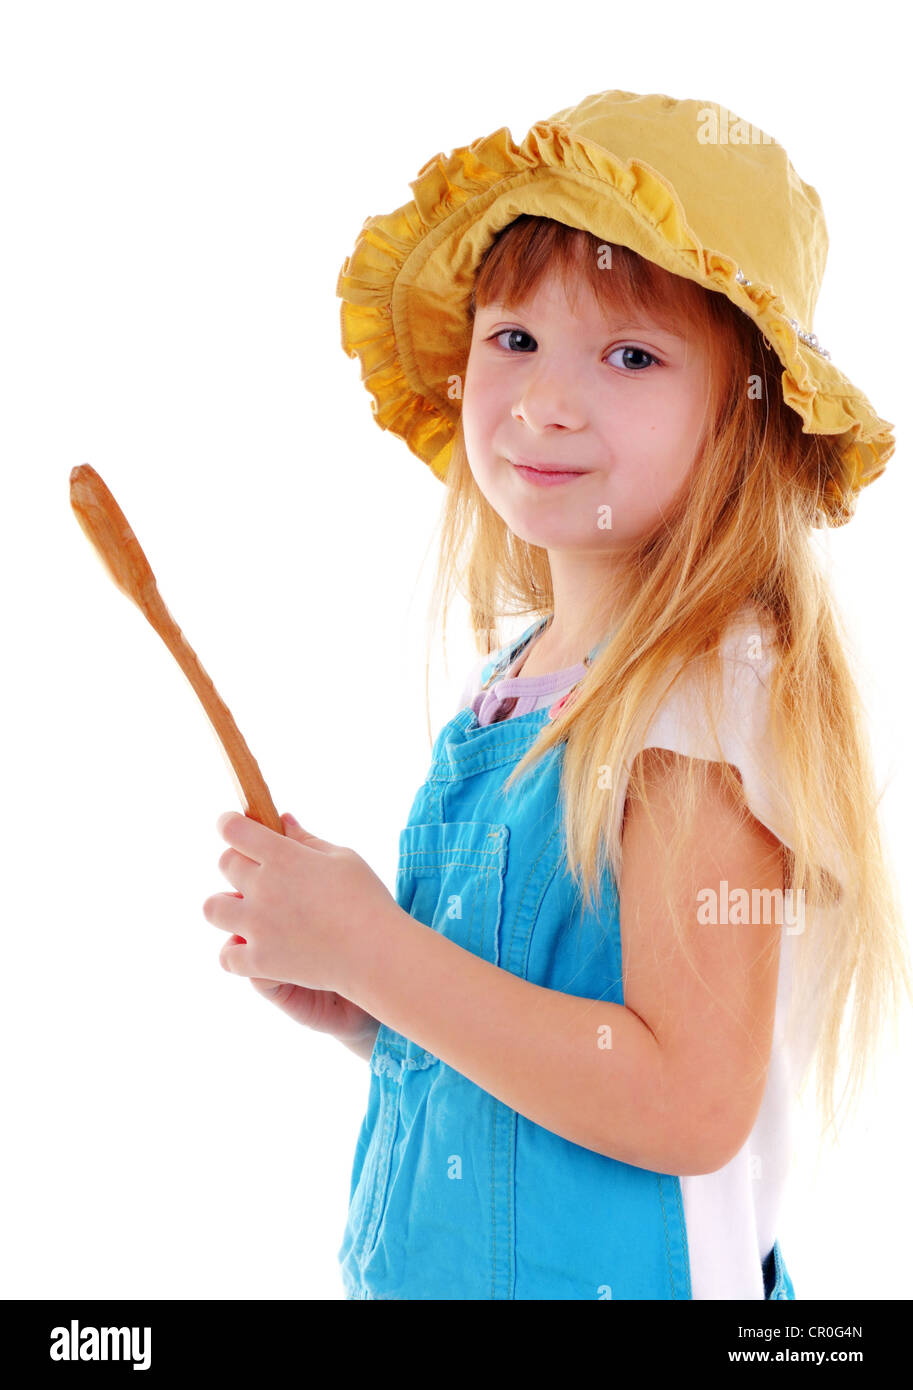 Small beauty girl with big wooden spoon on white background Stock Photo